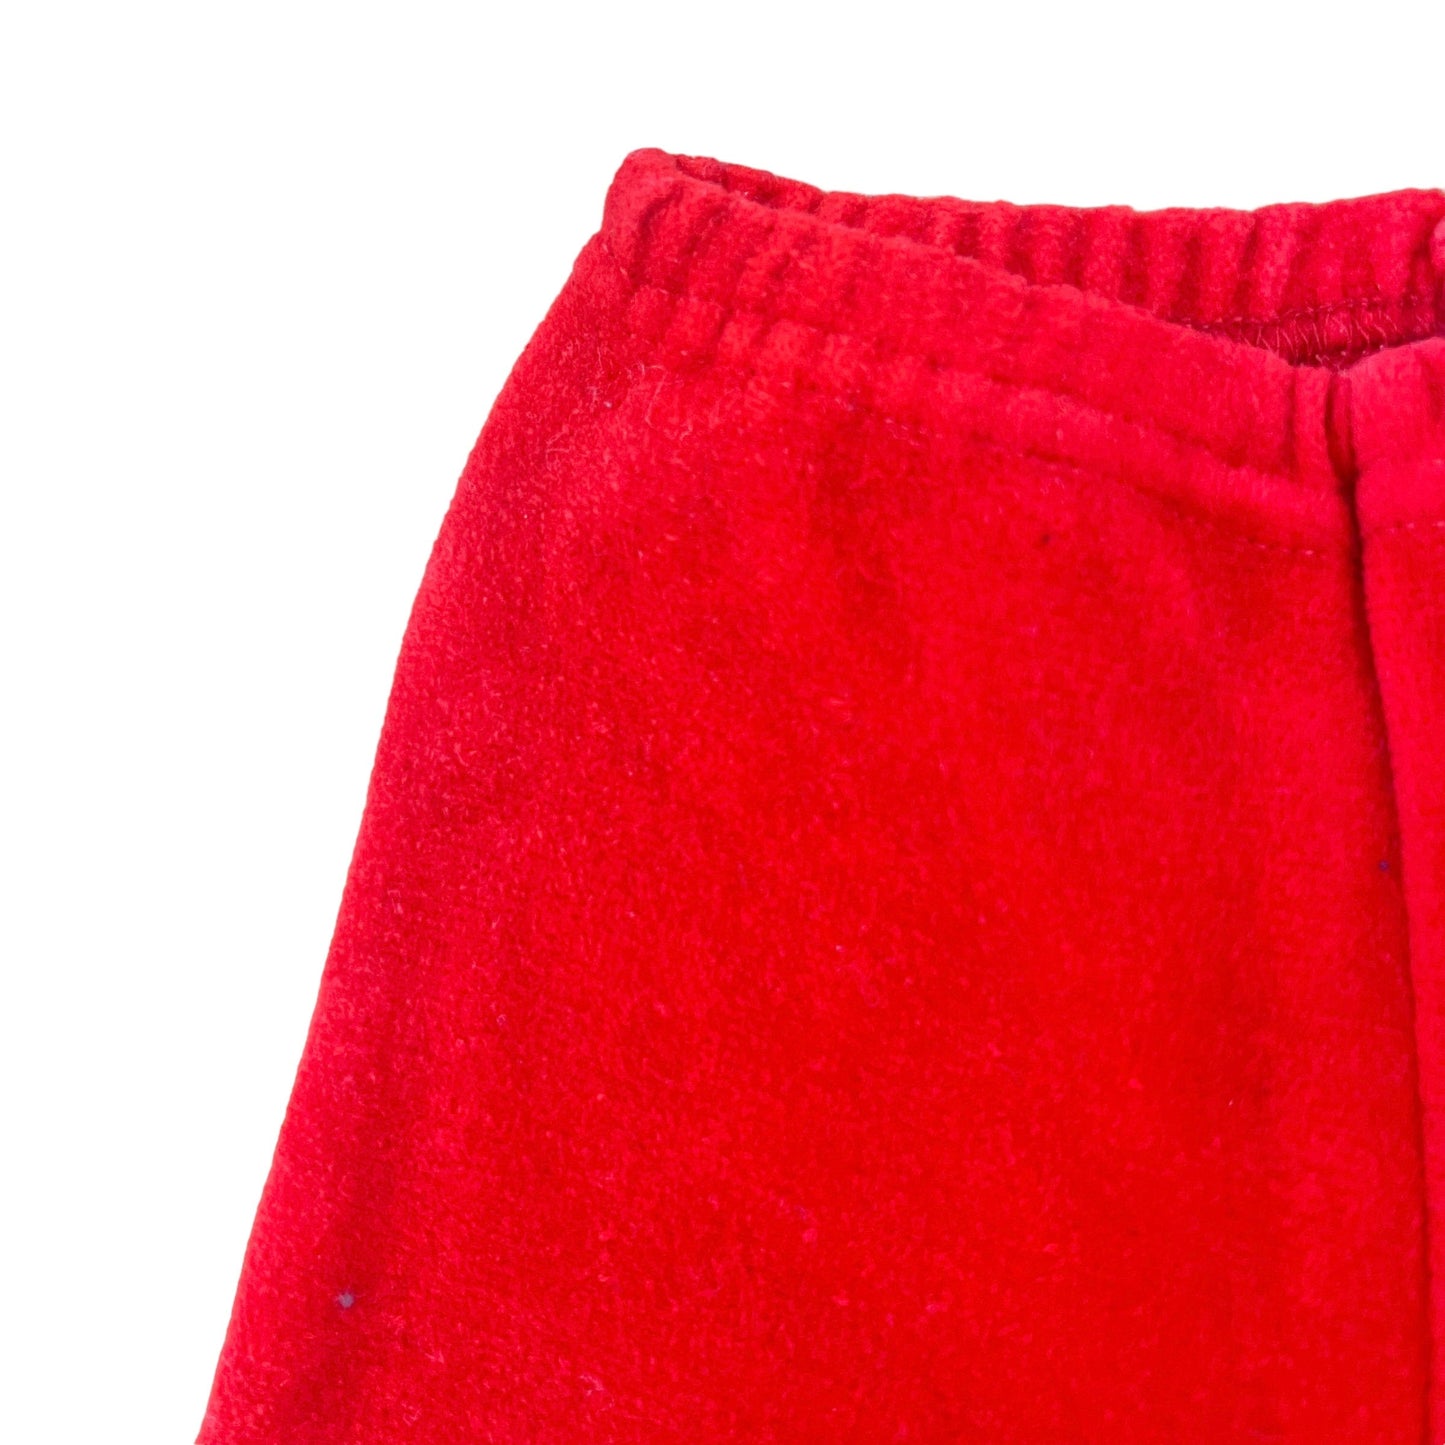 Vintage 70's  Terry Towel Red / Shorts  / Pants / Underwear 0-6M